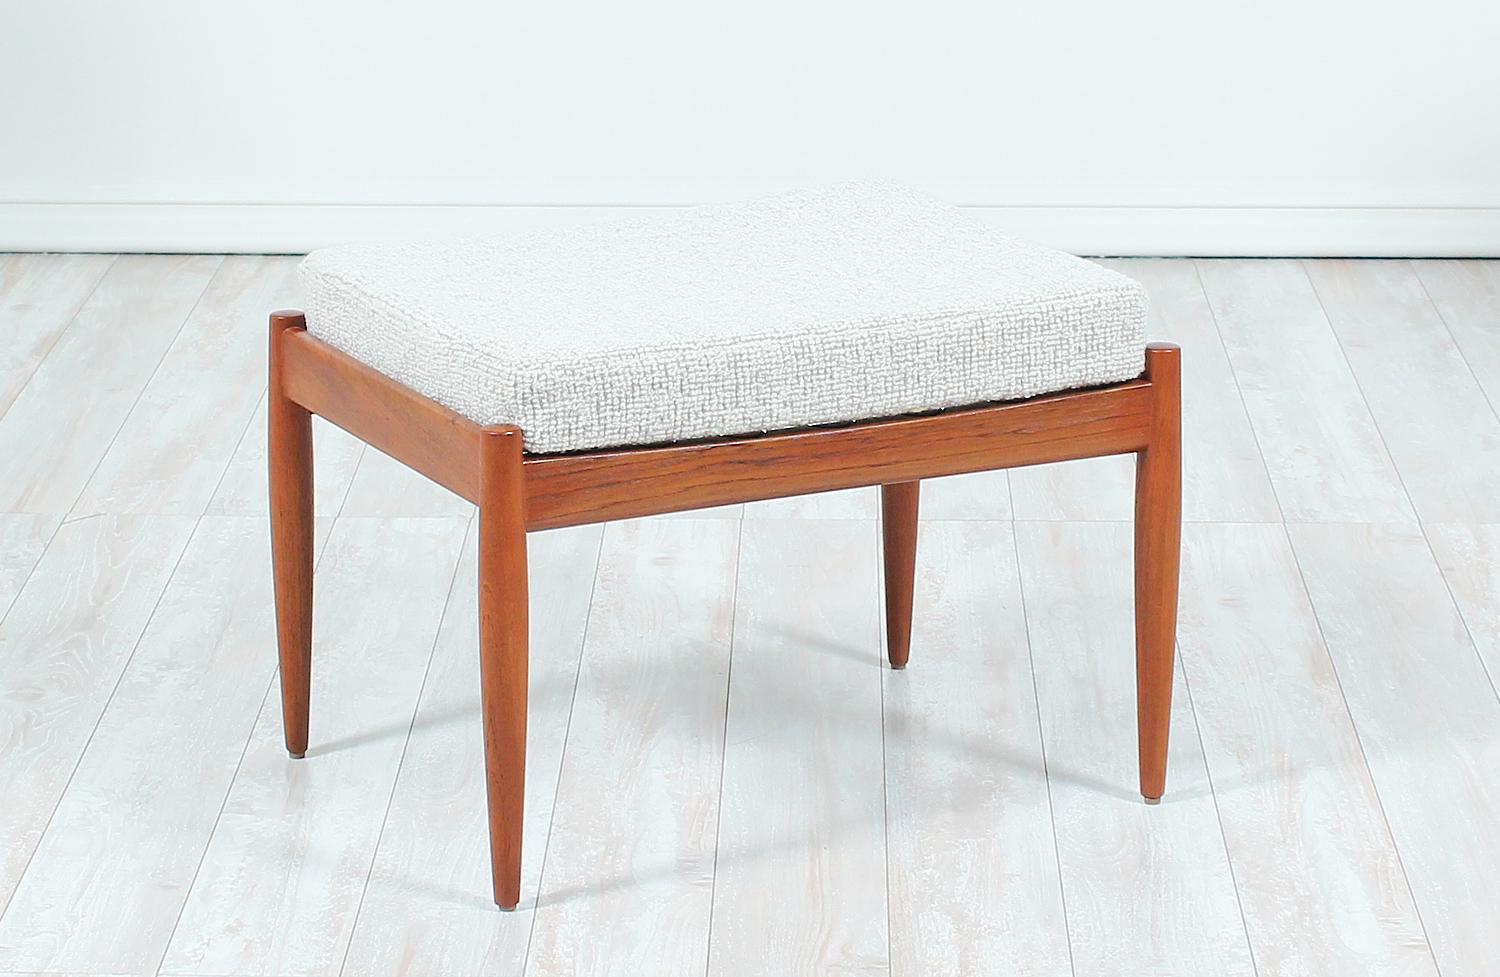 Designer: by Kai Kristiansen
Manufacturer: Magnus Olesen
Country of Origin: Denmark
Date of Manufacture: 1960-1969
Materials: Teak Wood, Tweed Fabric

Period Style: Danish Modern
Condition: Excellent
Extra Conditions: Newly Refinished &